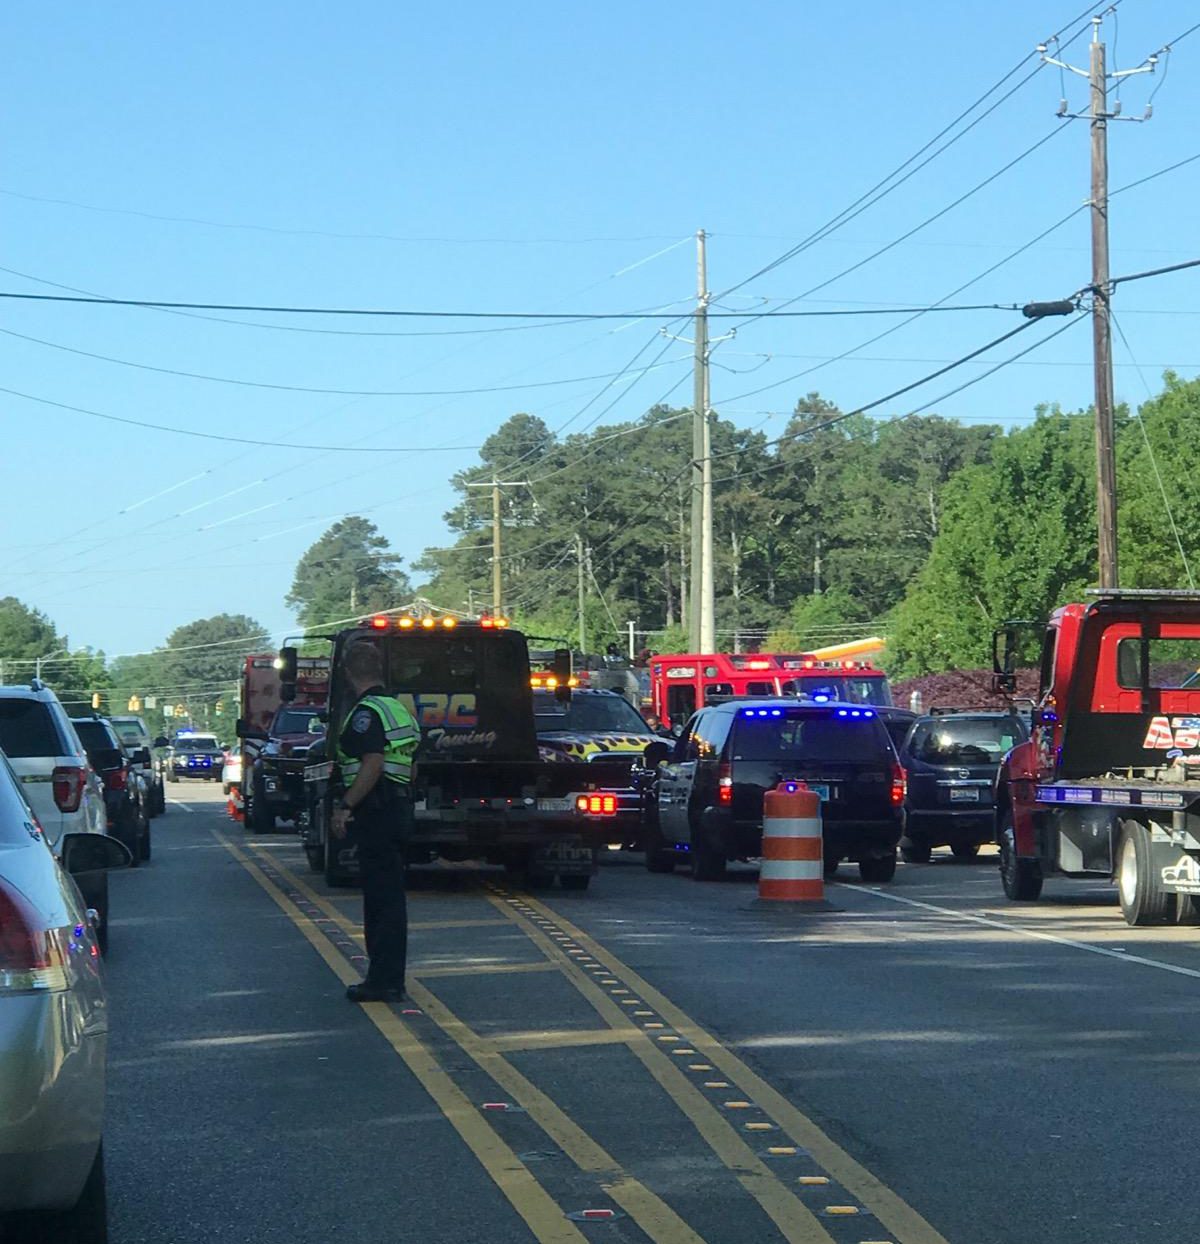 Updated: Wreck on Highway 11 in Trussville delays traffic, no injuries reported